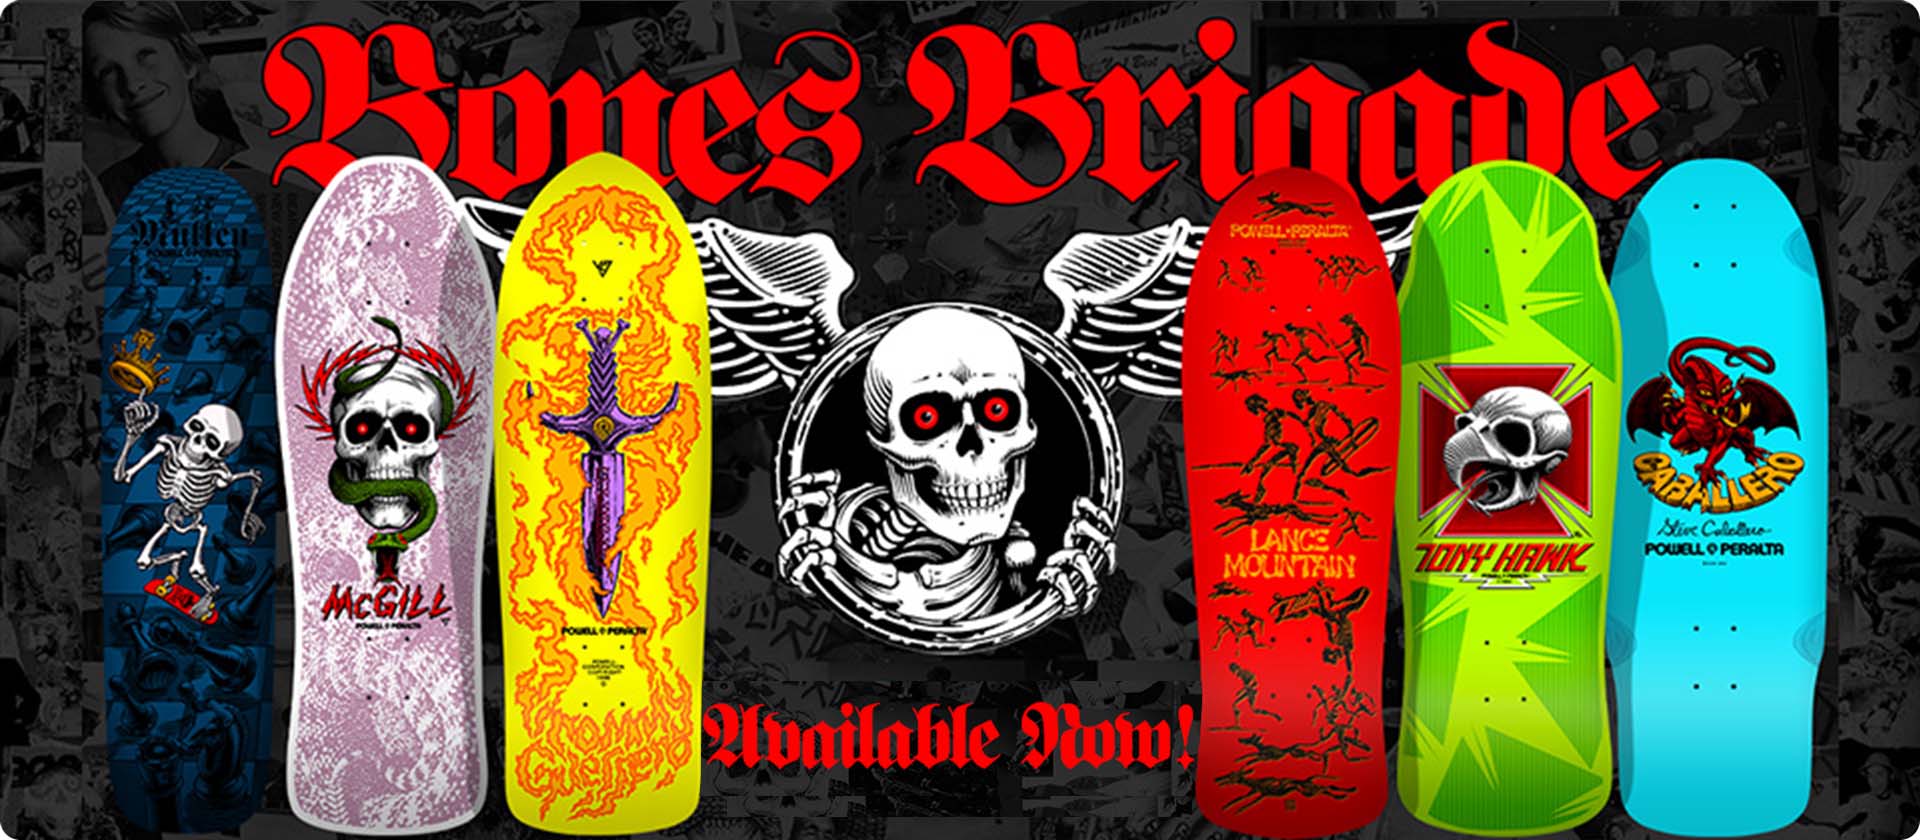 Series 15 Bones Brigade at SoCal Surf Shop -Your Southern California Lifestyle Store